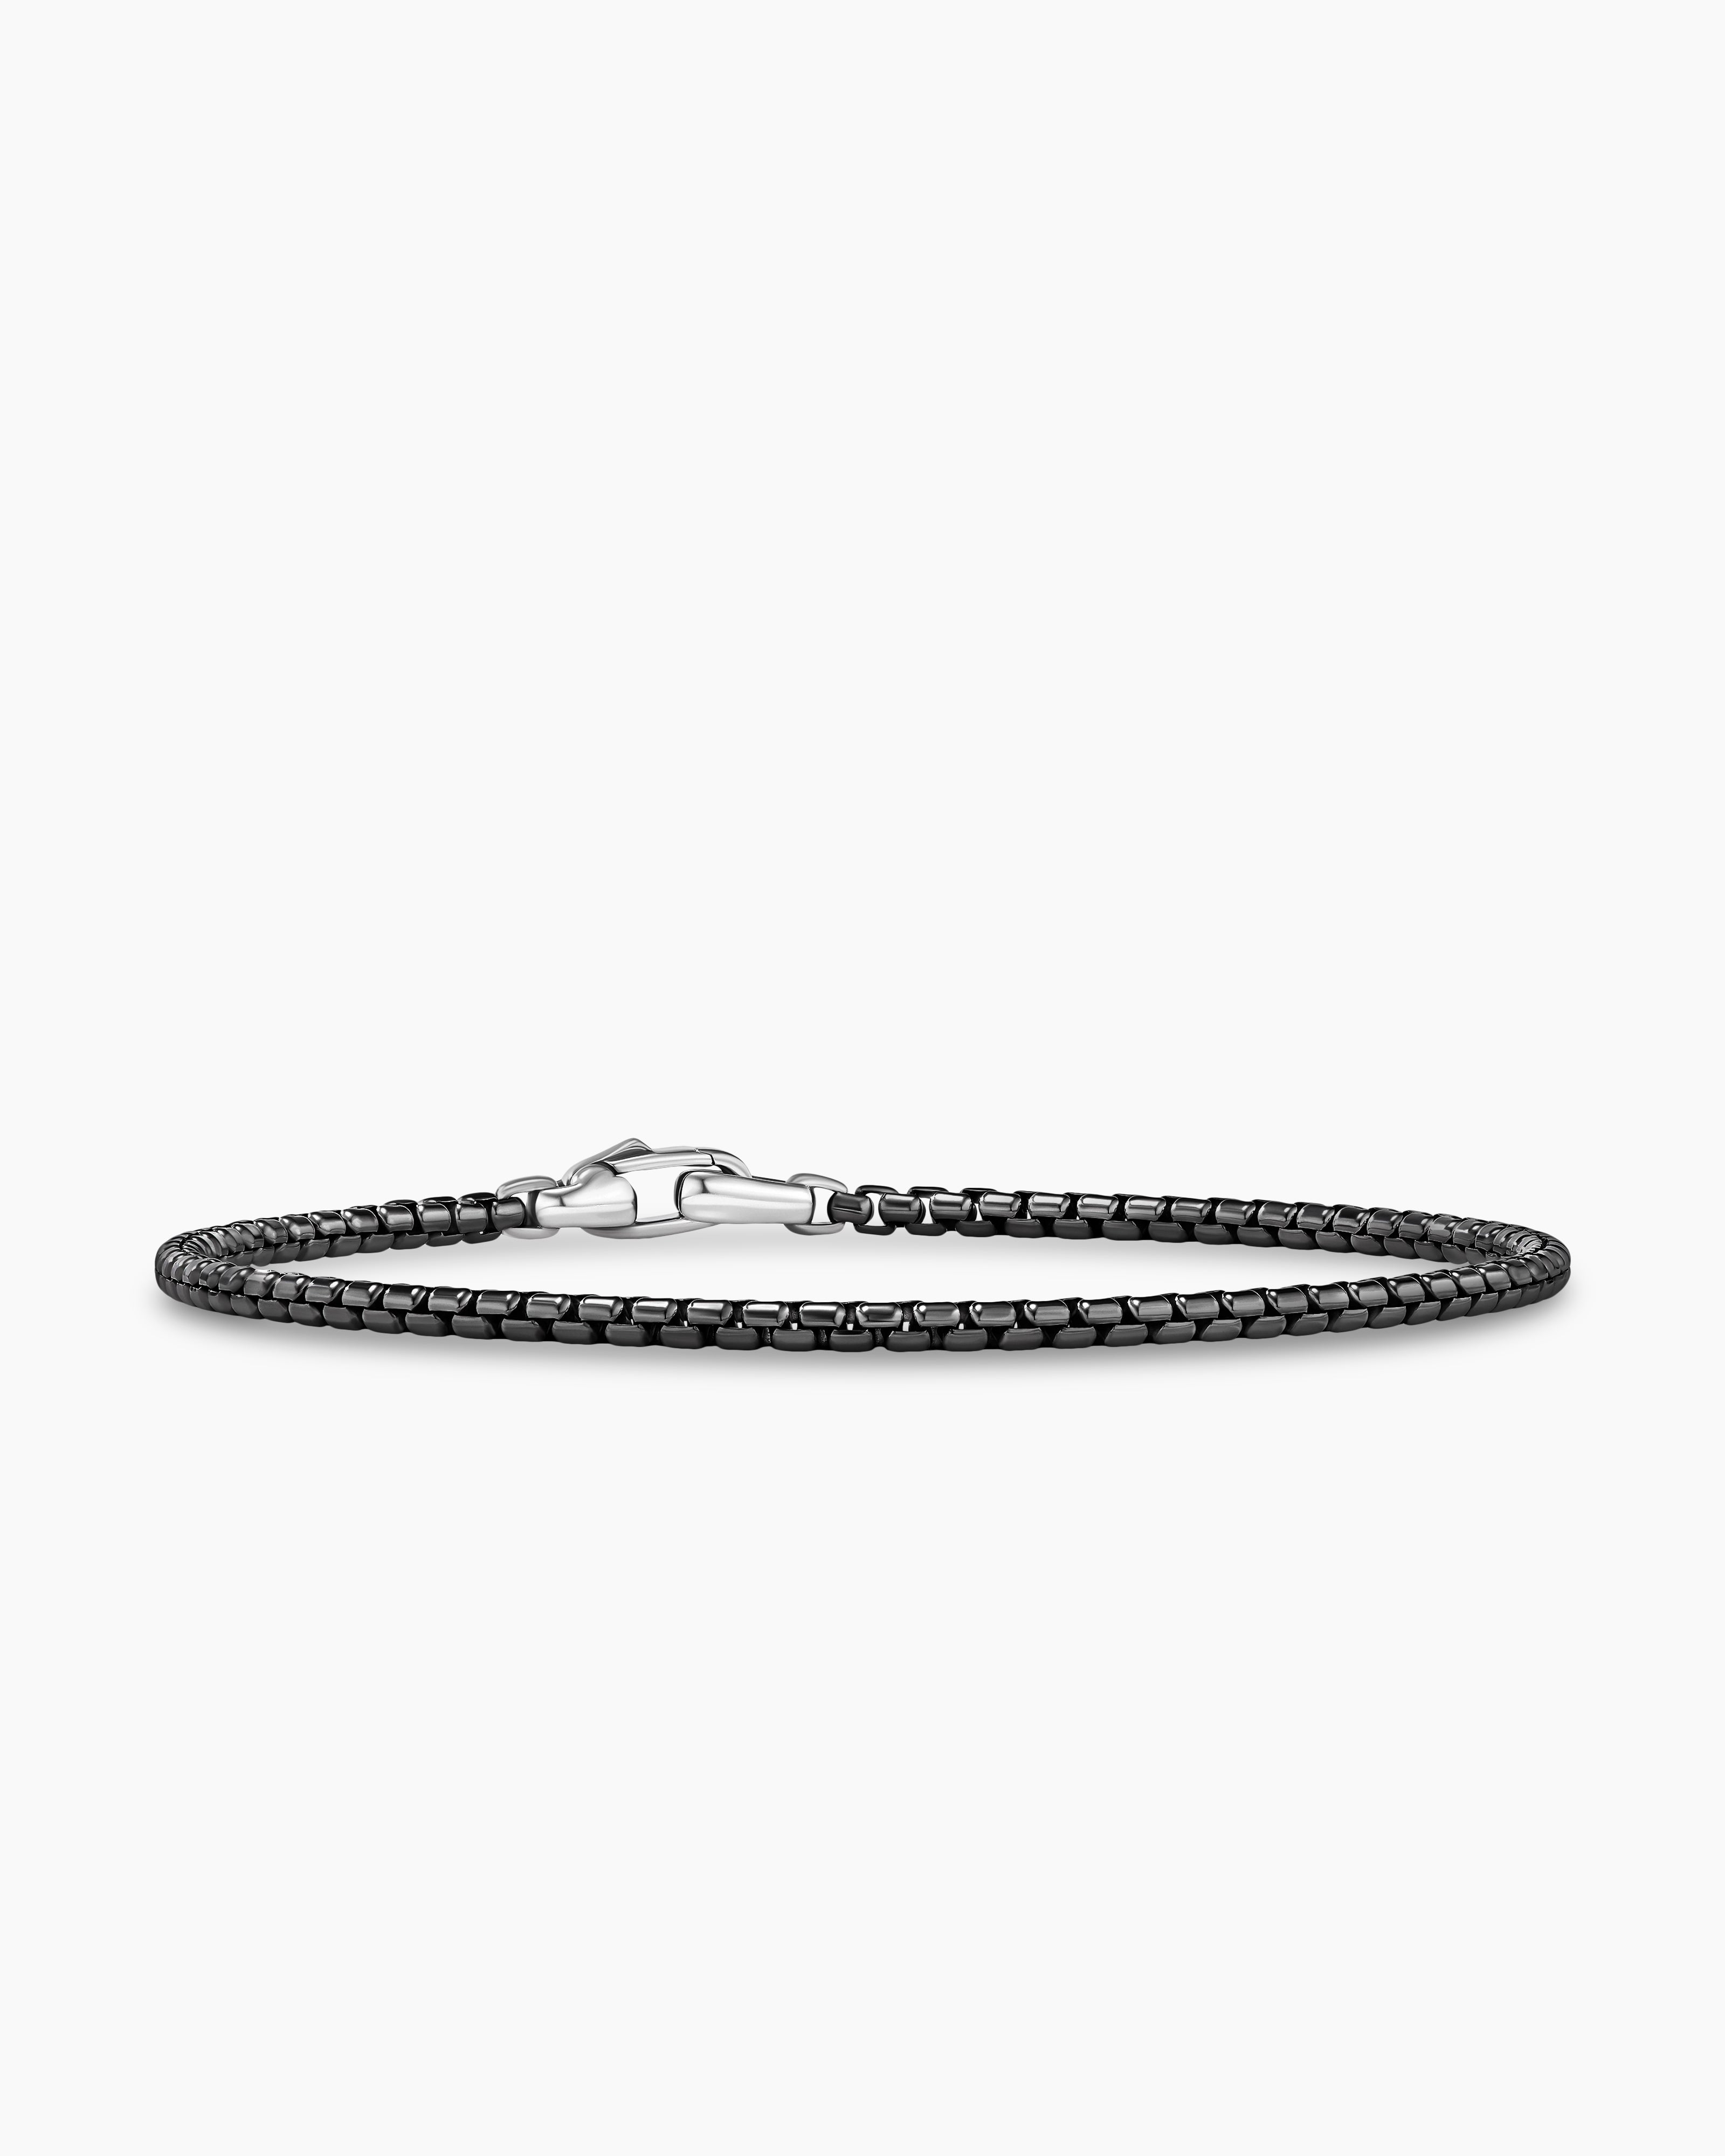 Bracelet in woven black leather with steel closure, black PVD